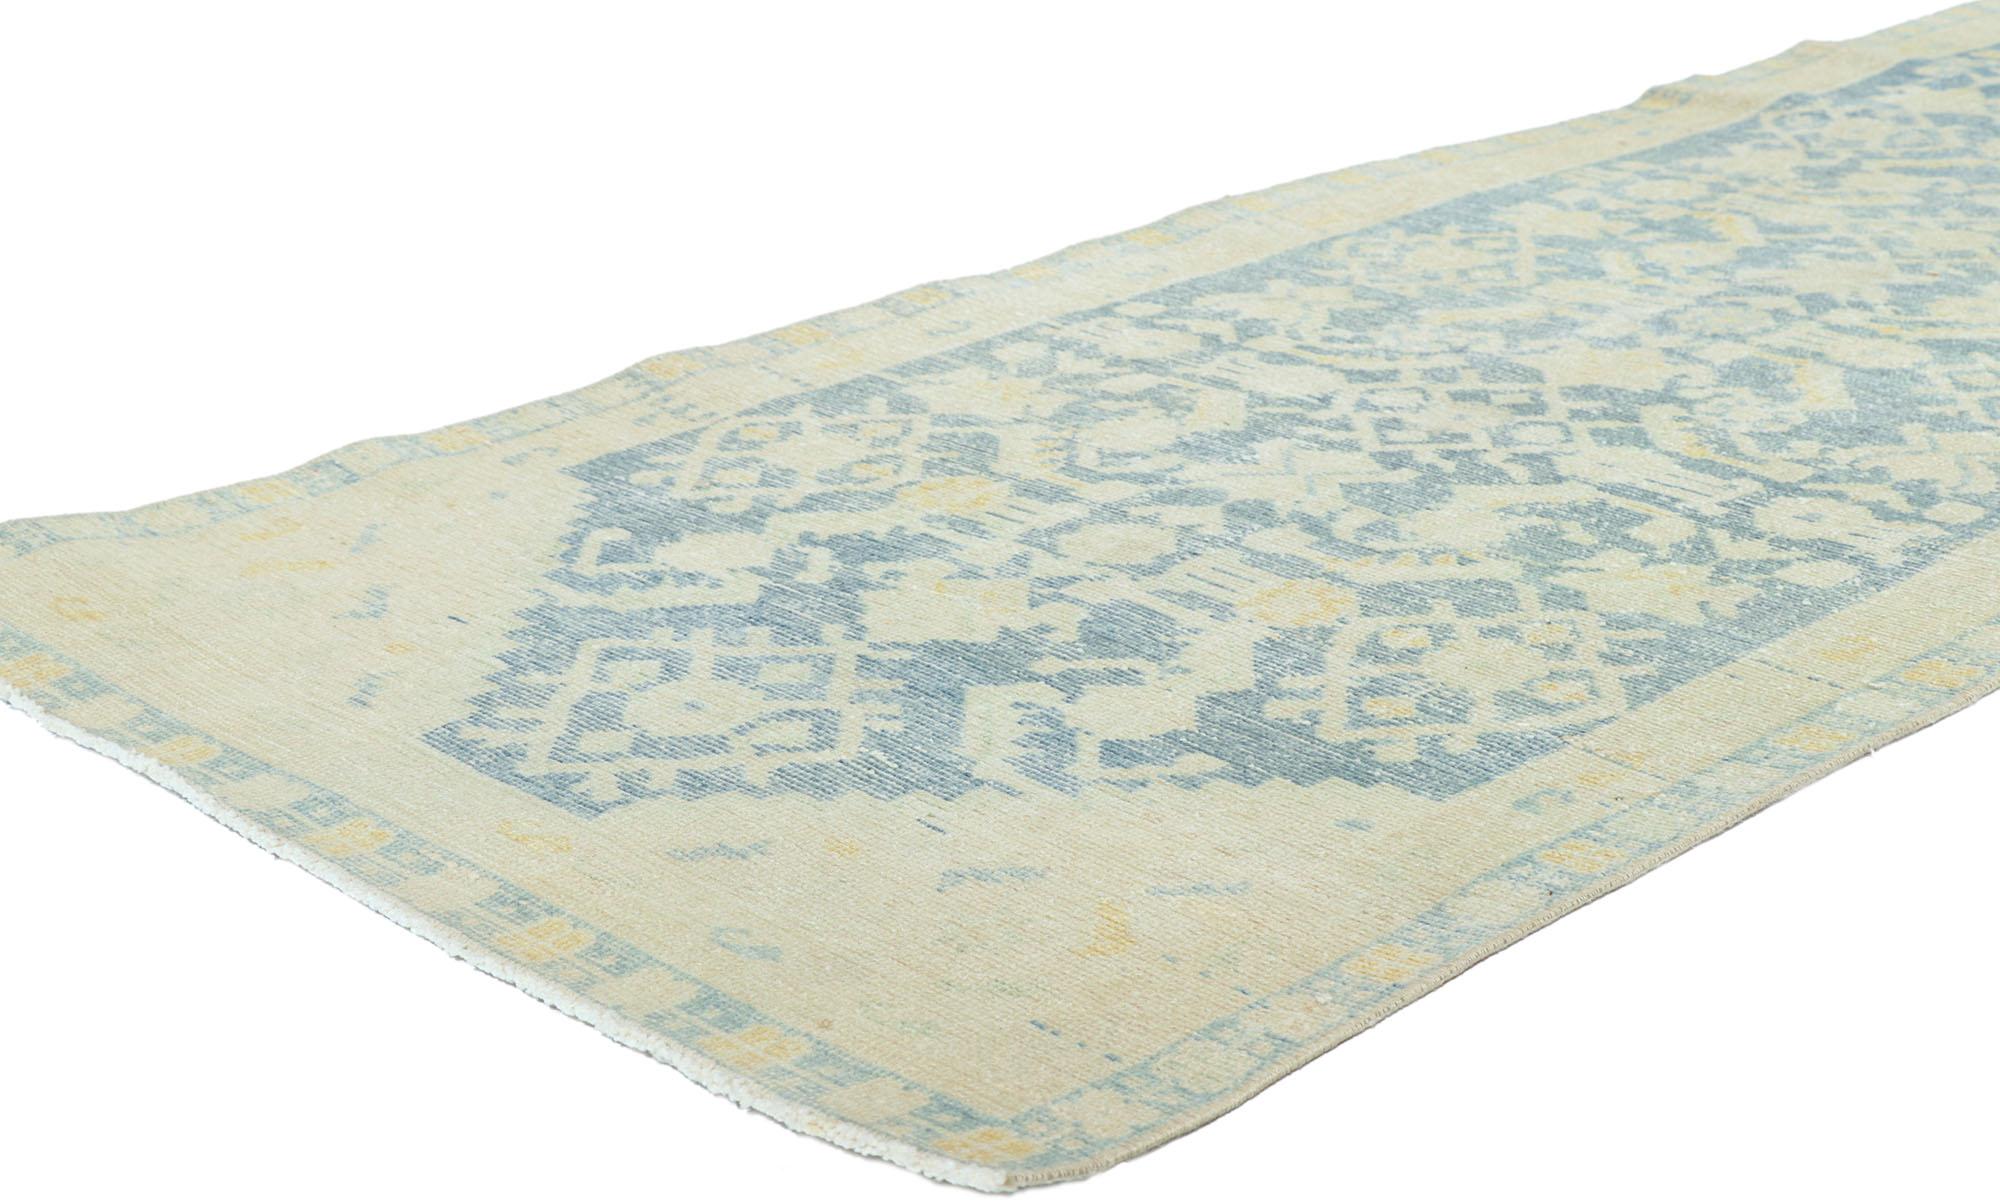 53768 Distressed Antique Persian Malayer Runner 03'00 x 12'06. Emanating sophistication and grace with blue hues, this hand knotted wool distressed antique Persian Malayer runner will take on a curated lived-in look that feels timeless while